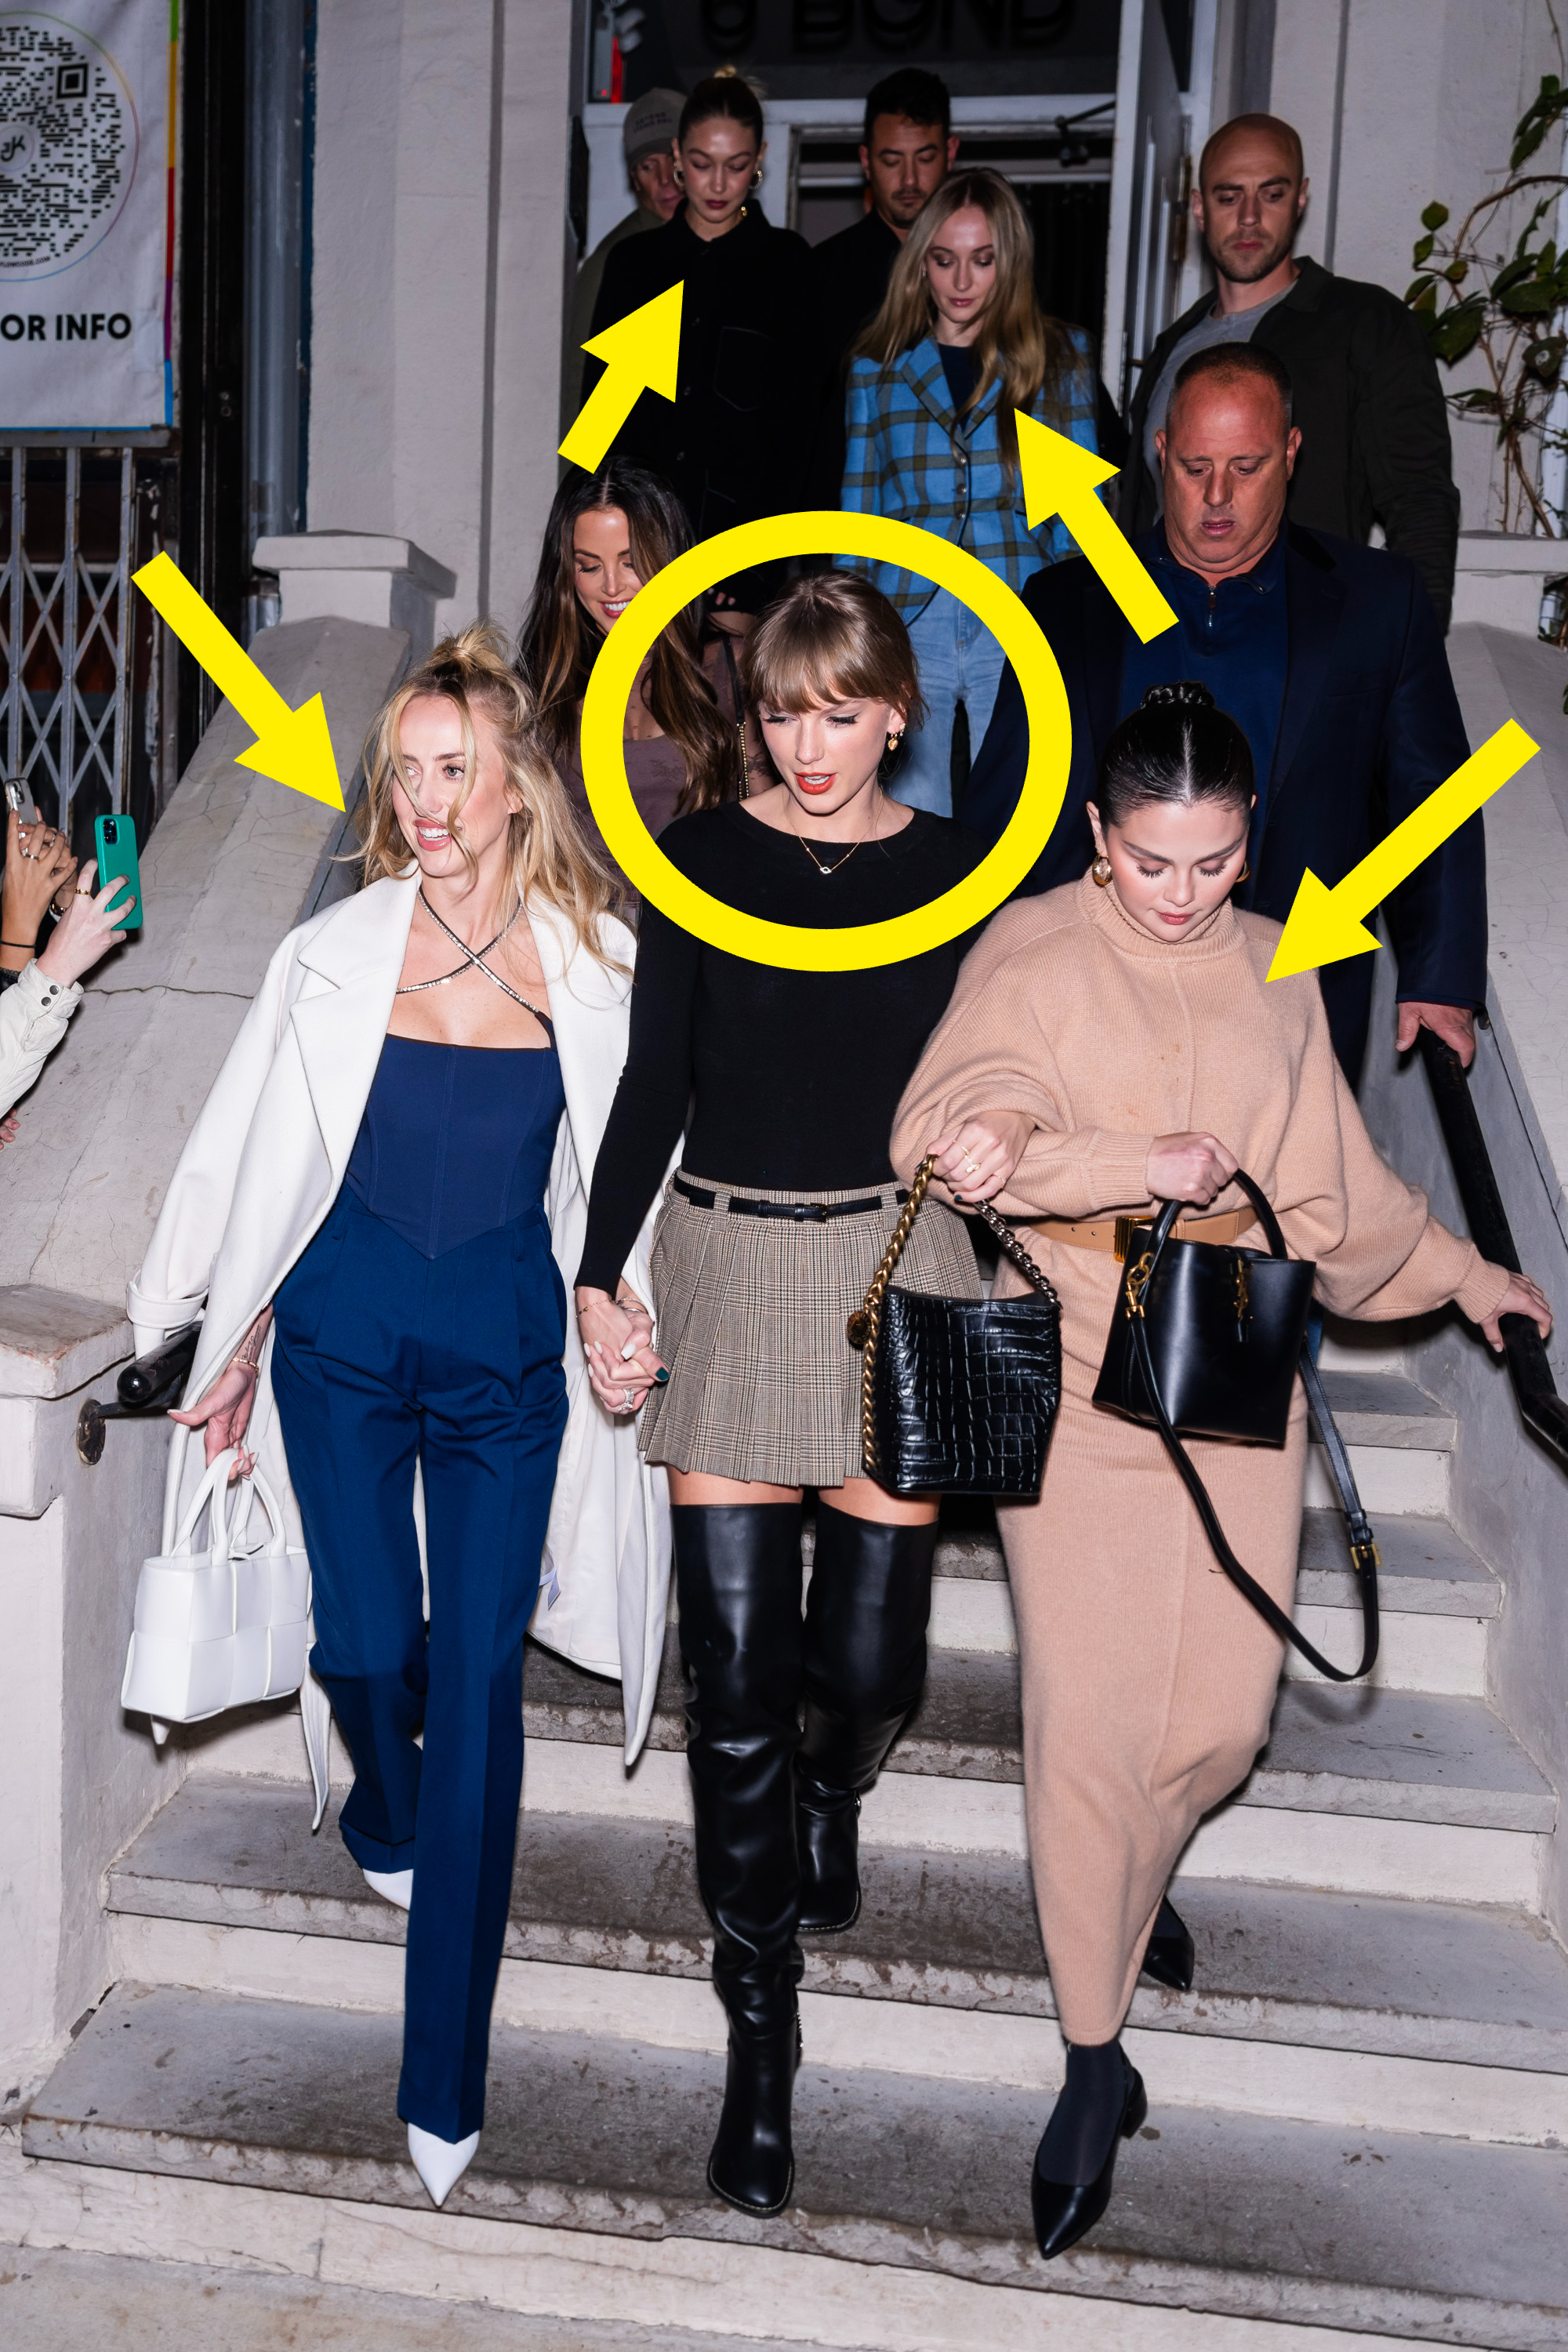 Taylor and friends exiting a building